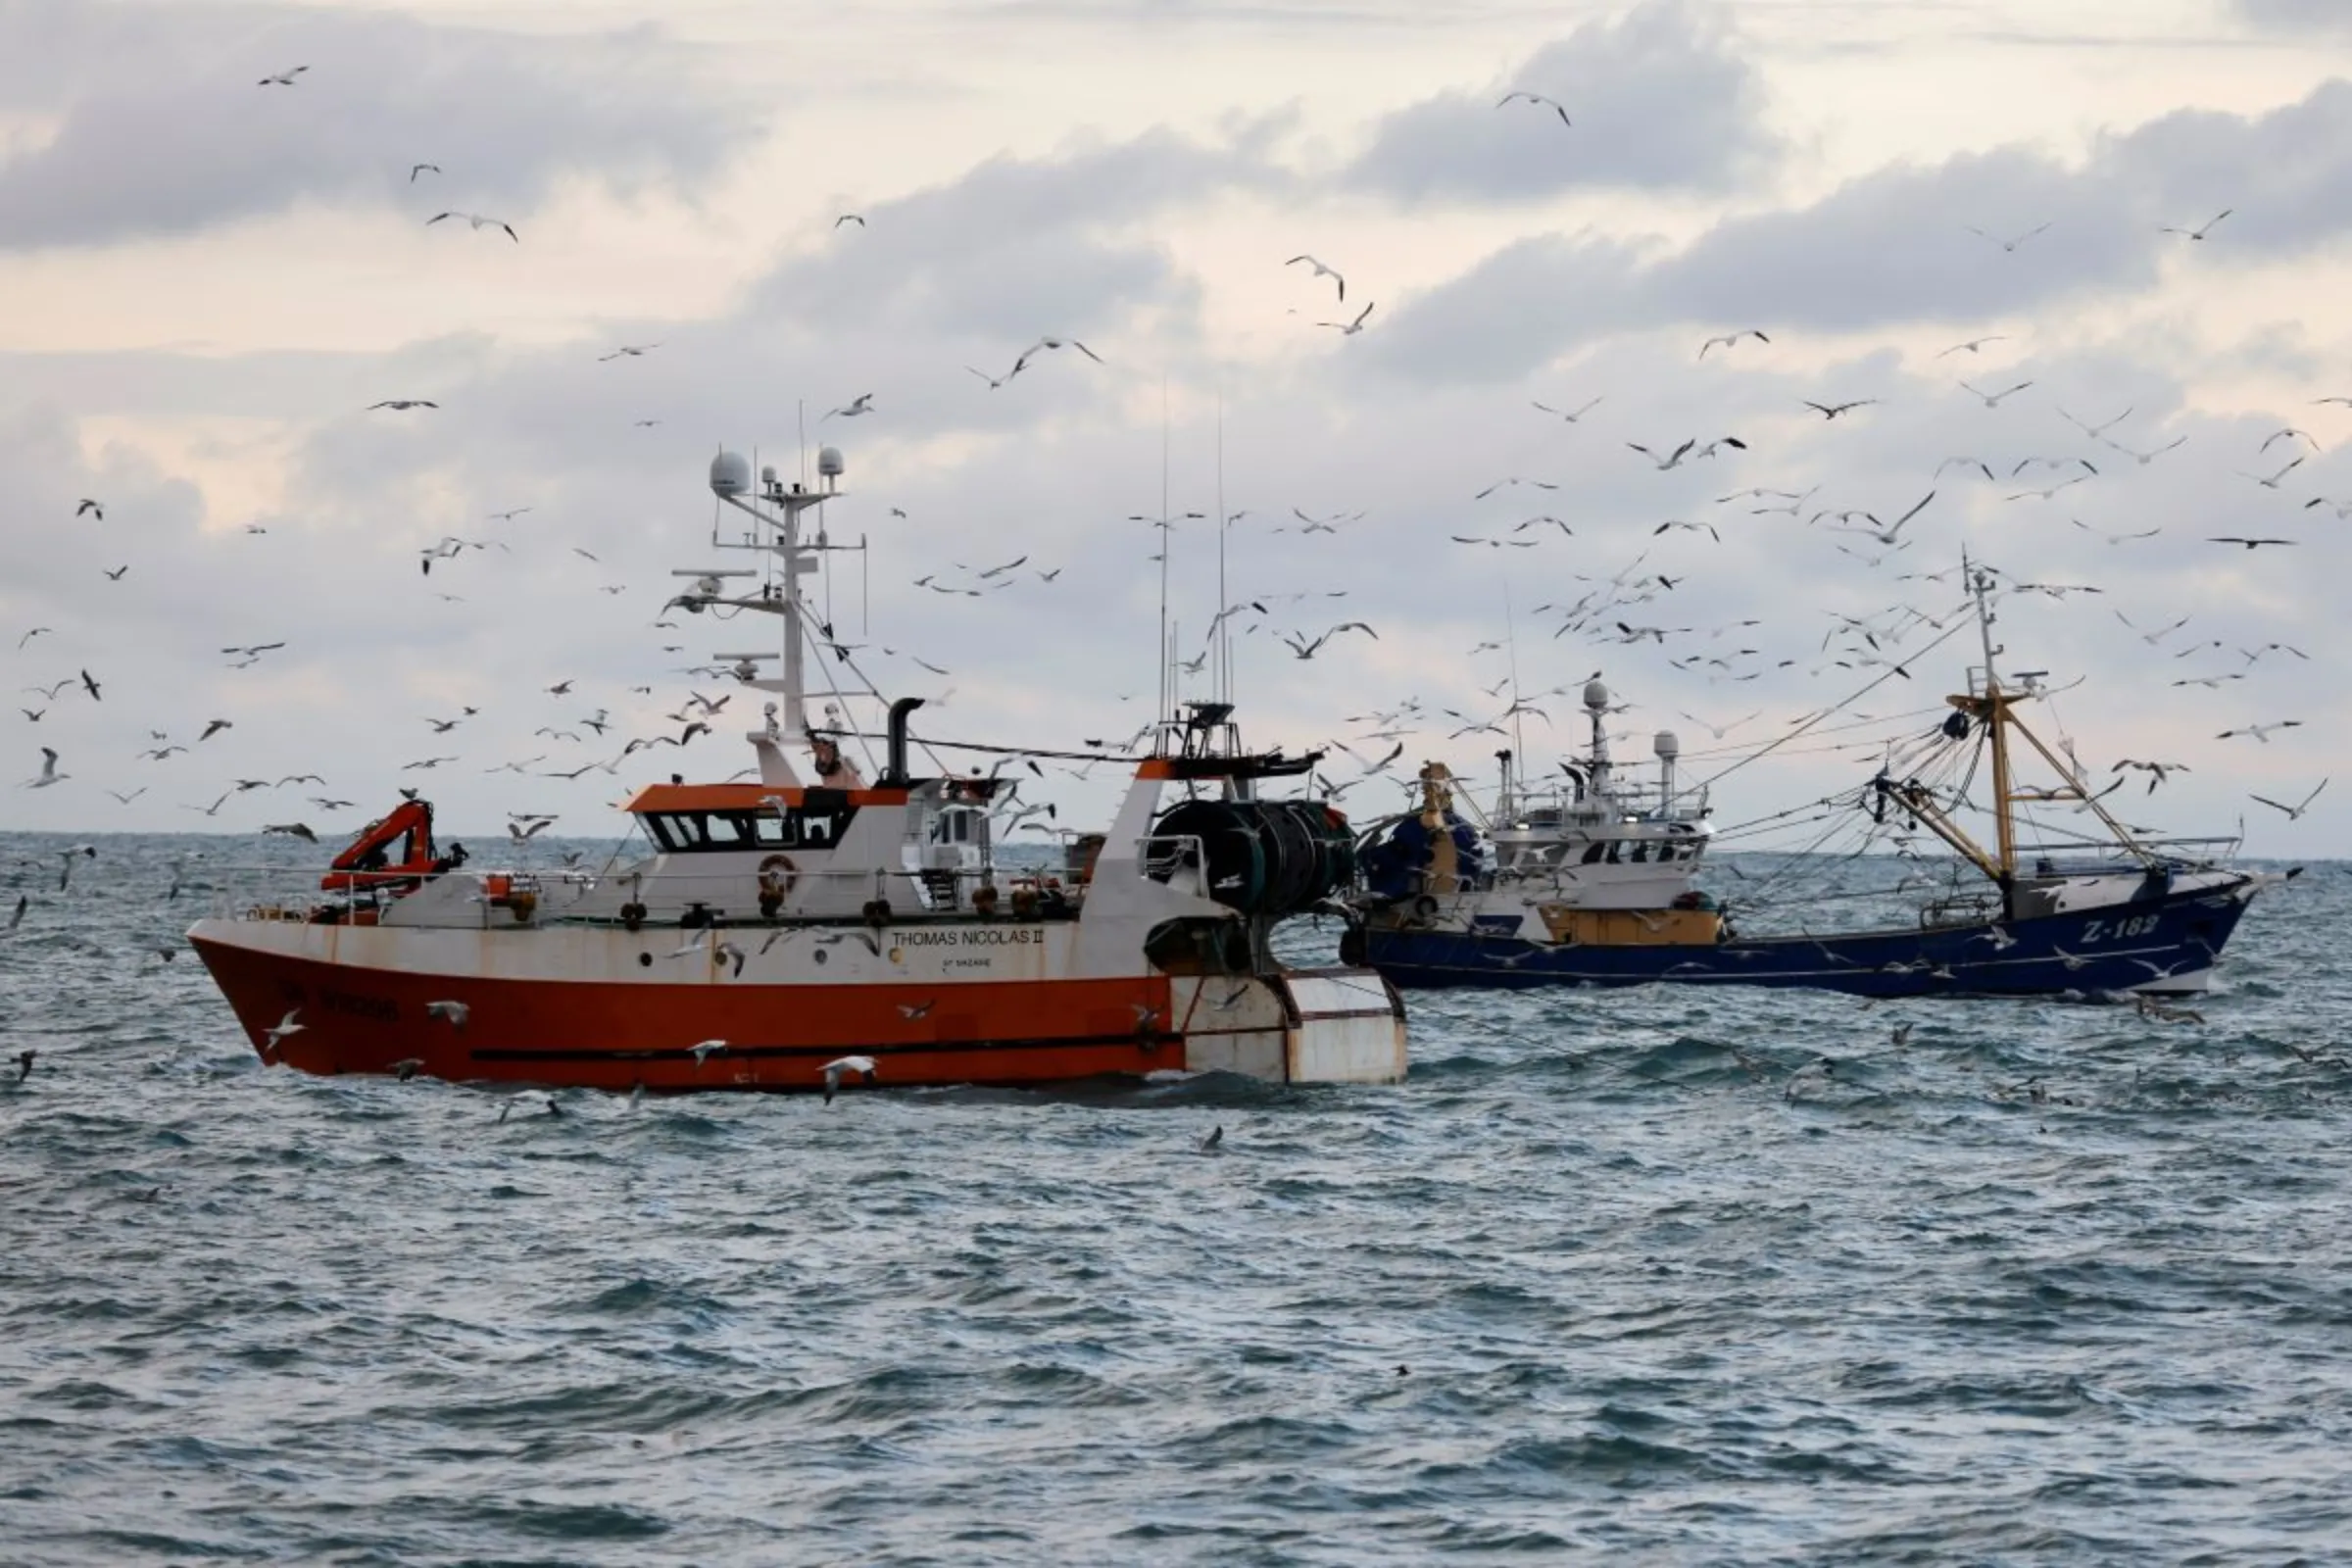 The French trawler 'Thomas Nicolas II' sails past a Dutch trawler in the North Sea, off the coast of northern France, December 7, 2020.  REUTERS/Pascal Rossignol